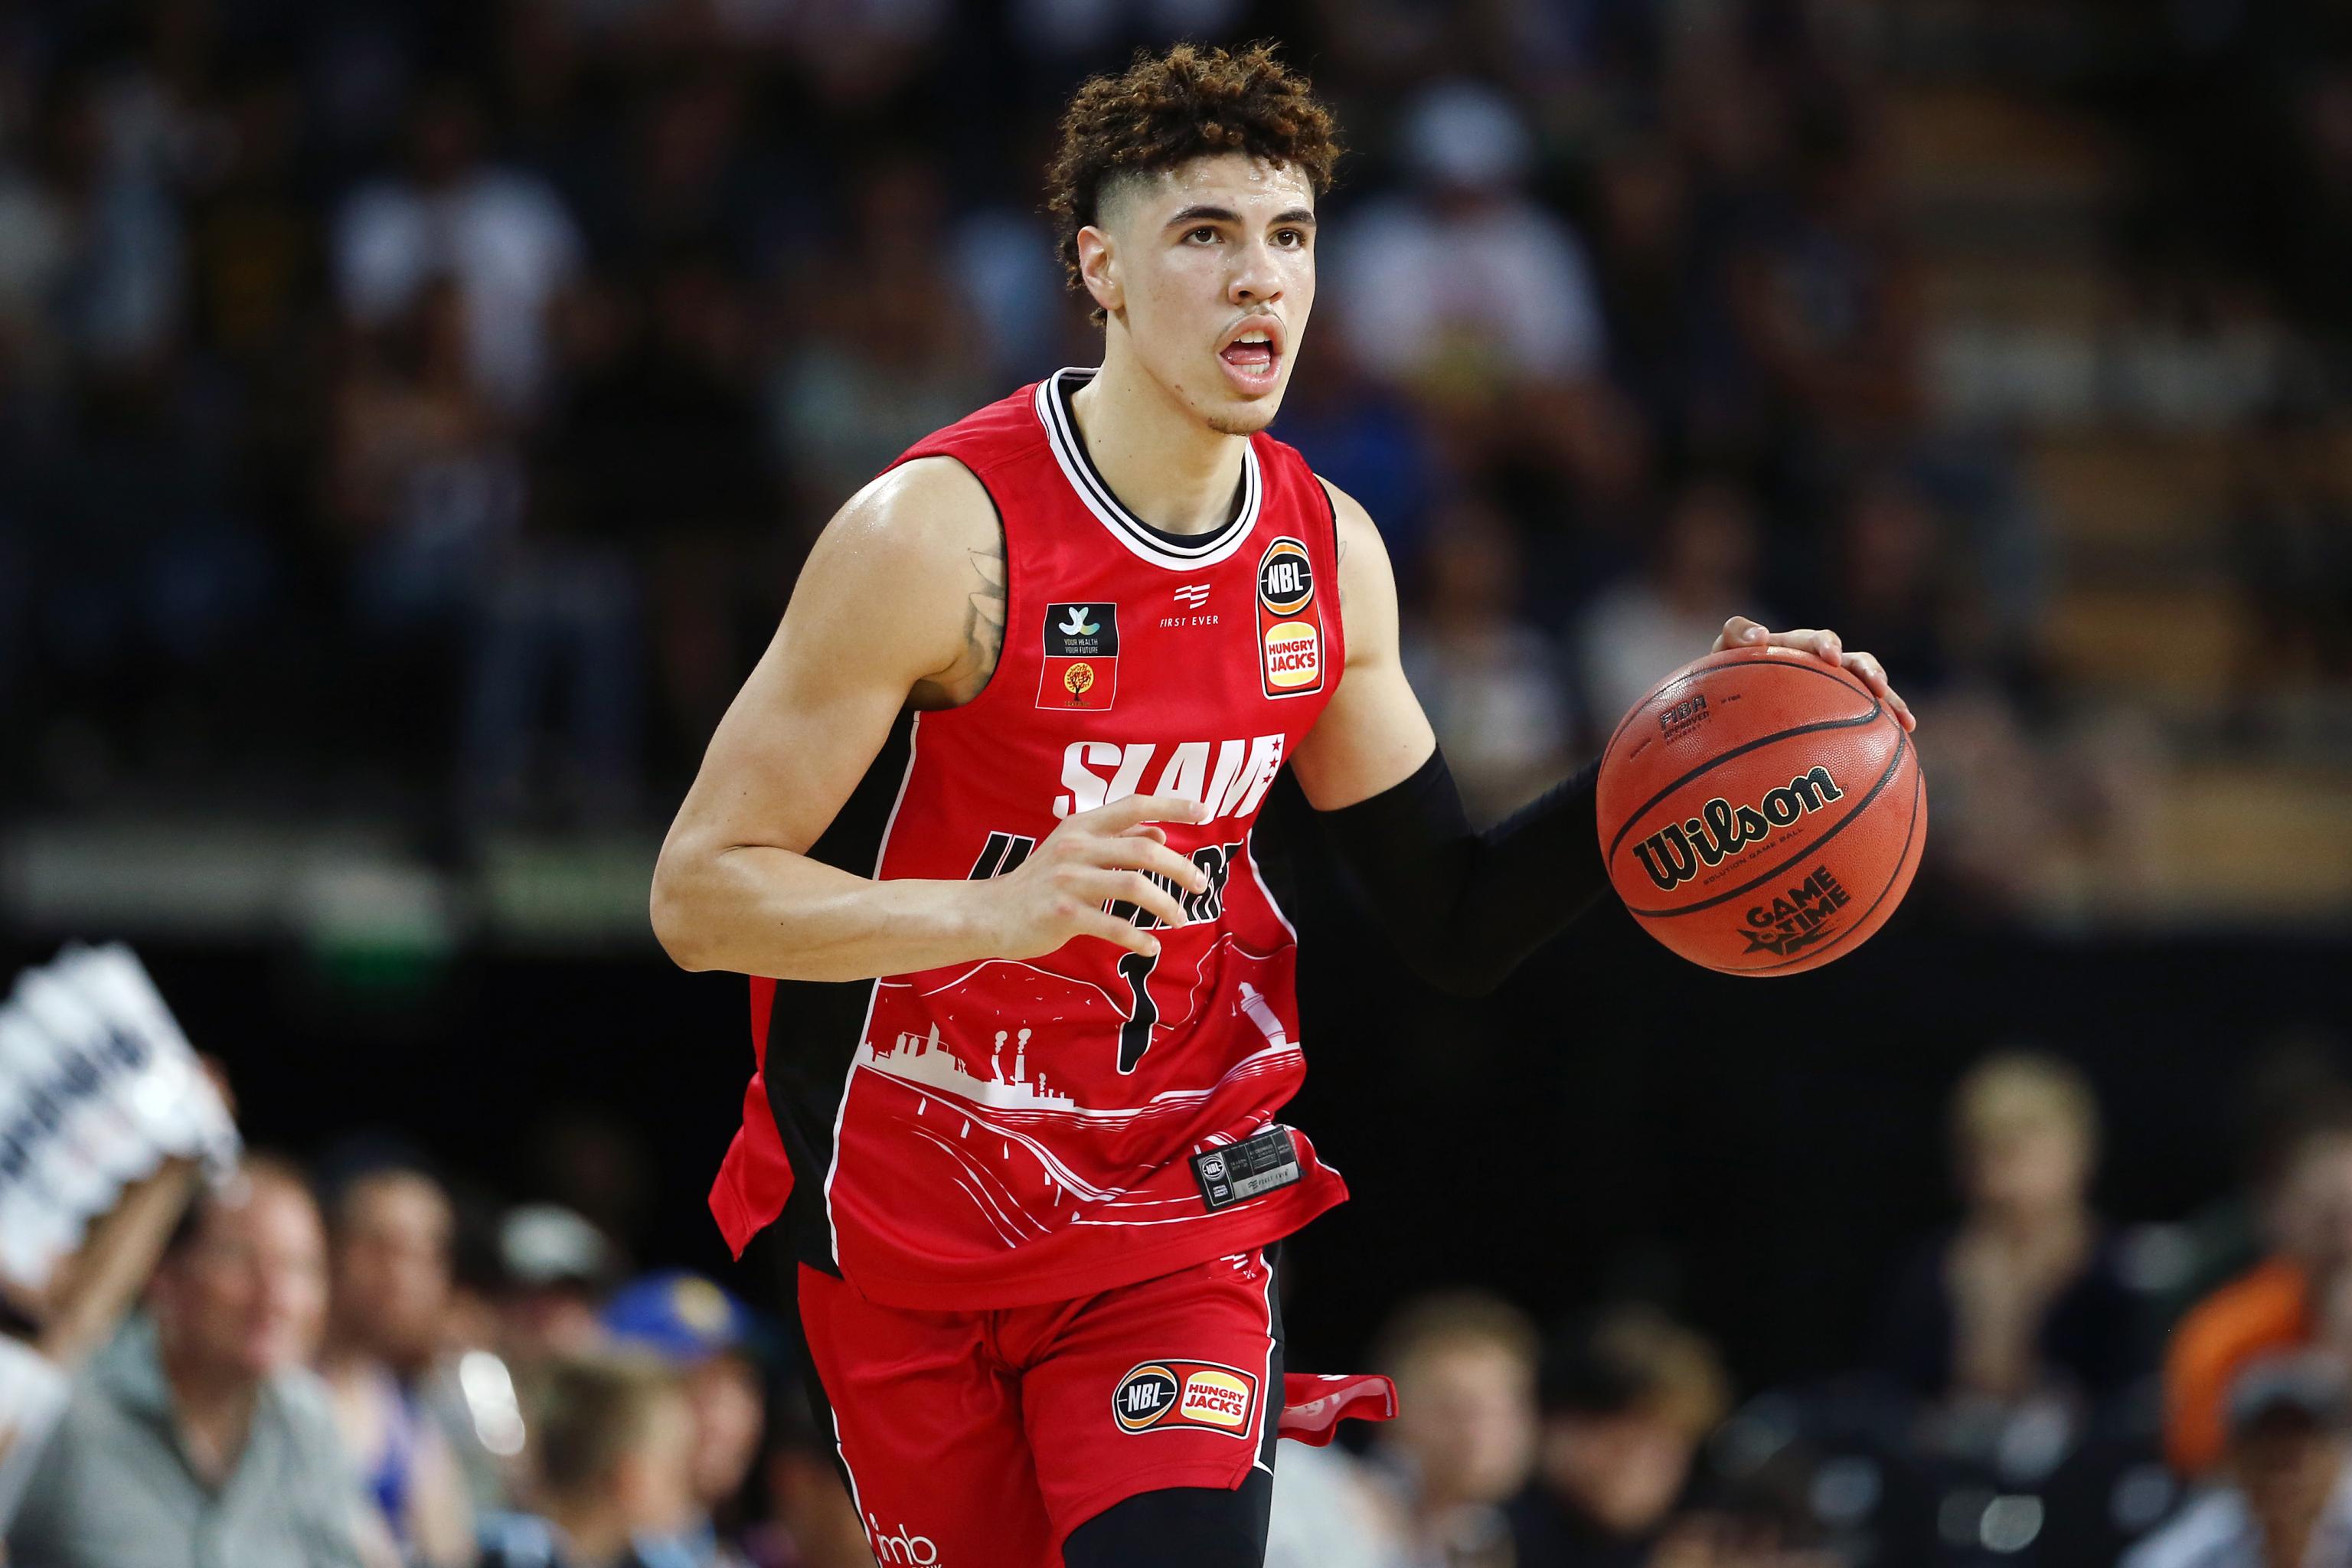 Nba Draft 2020 Expert Mock Predictions For Lamelo Ball And Top Prospects Bleacher Report Latest News Videos And Highlights